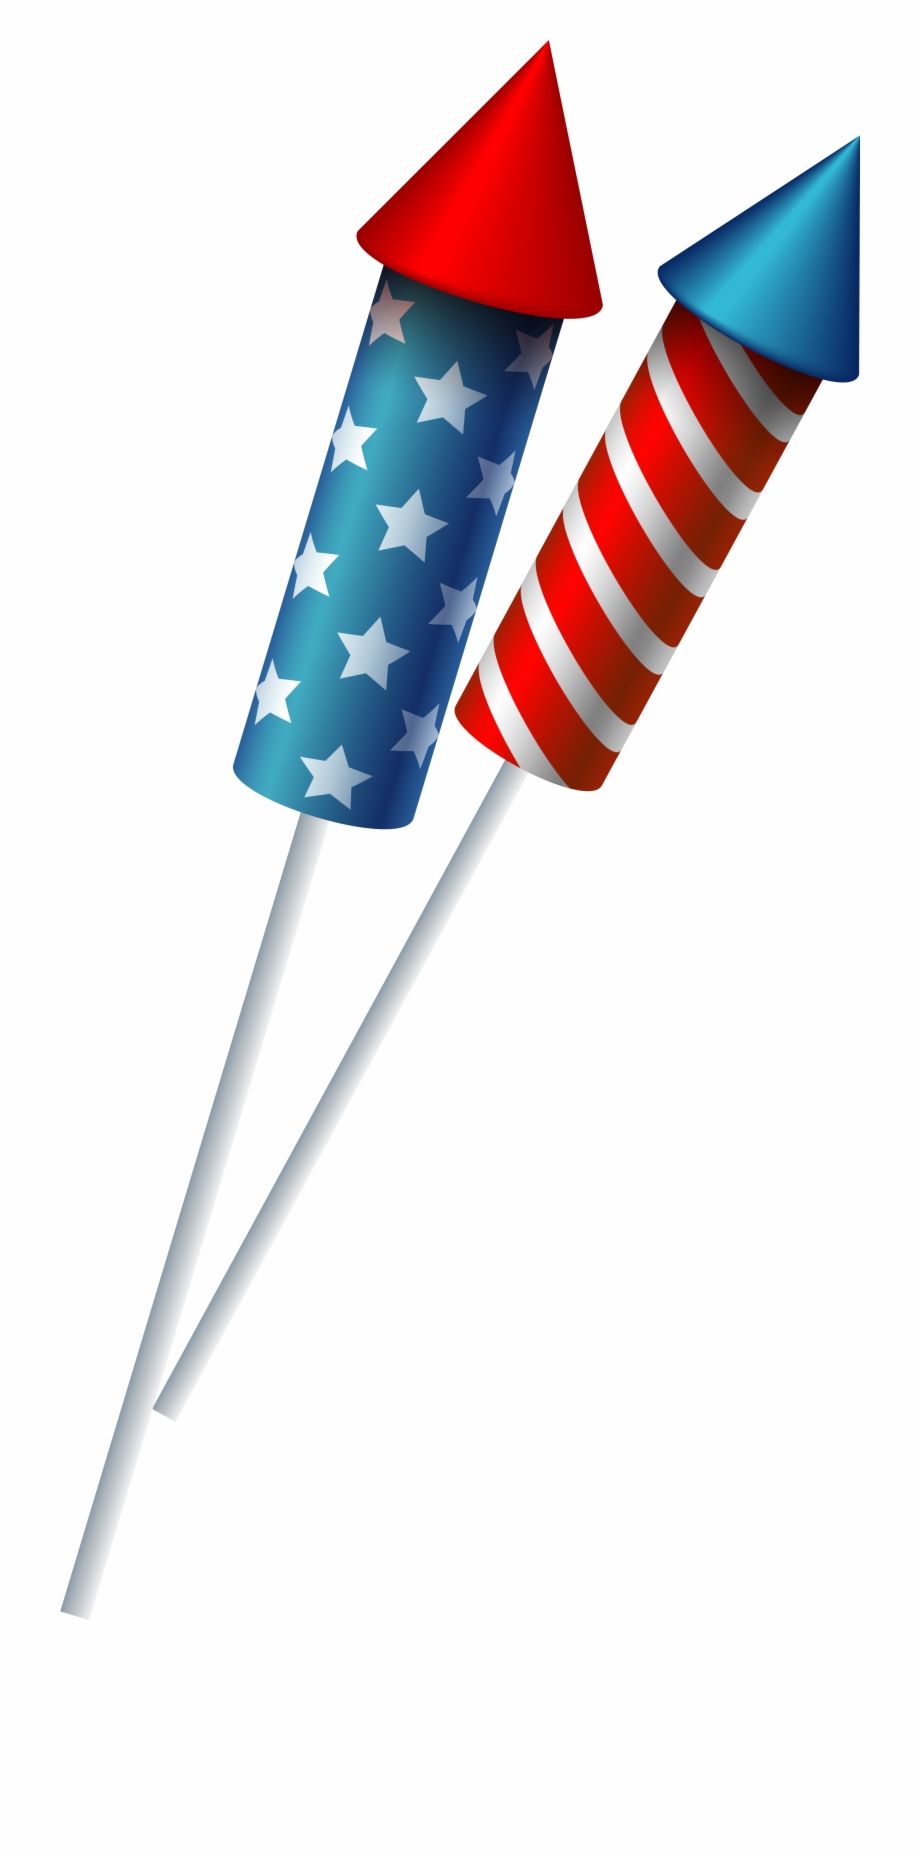 clipart fireworks independence day firework